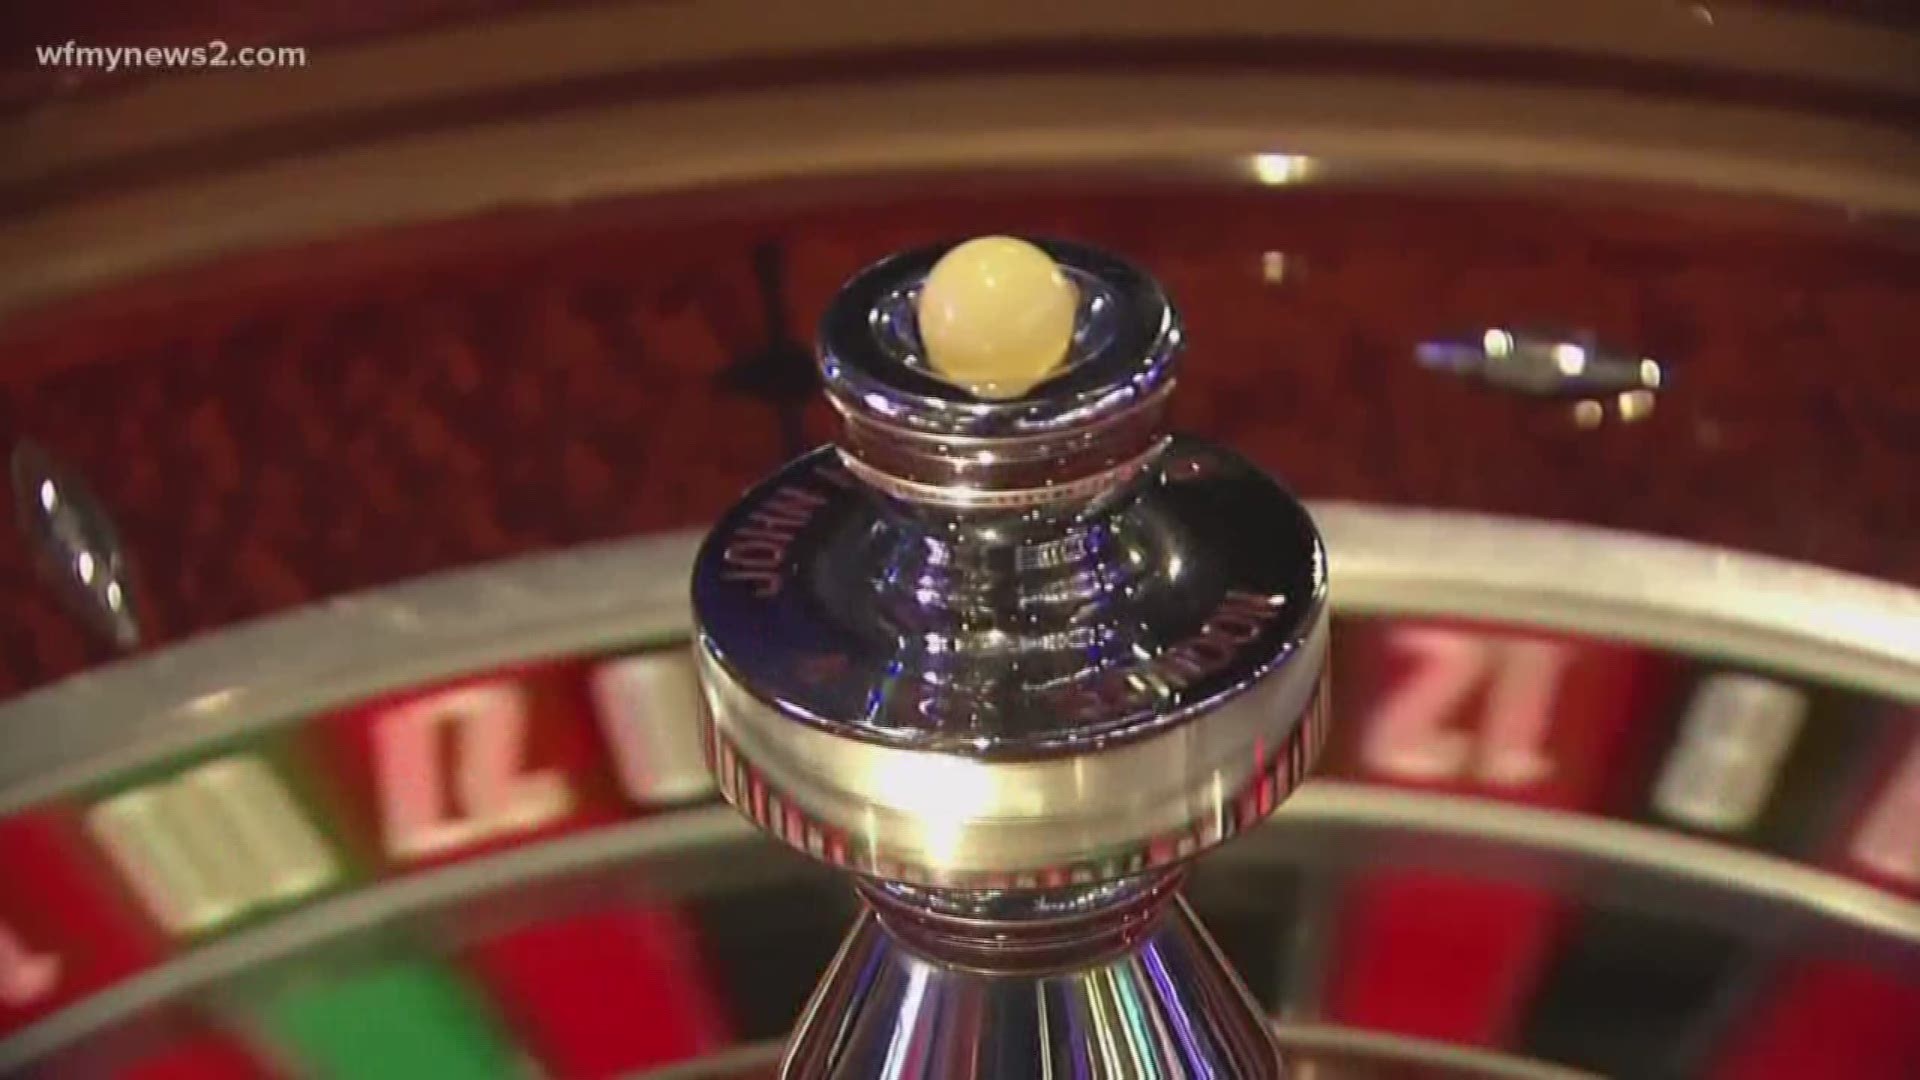 Virginia lawmakers have approved a bill that legalizes gambling. What can you do to get control of gambling before it takes over your life? Blanca Cobb breaks it all down.